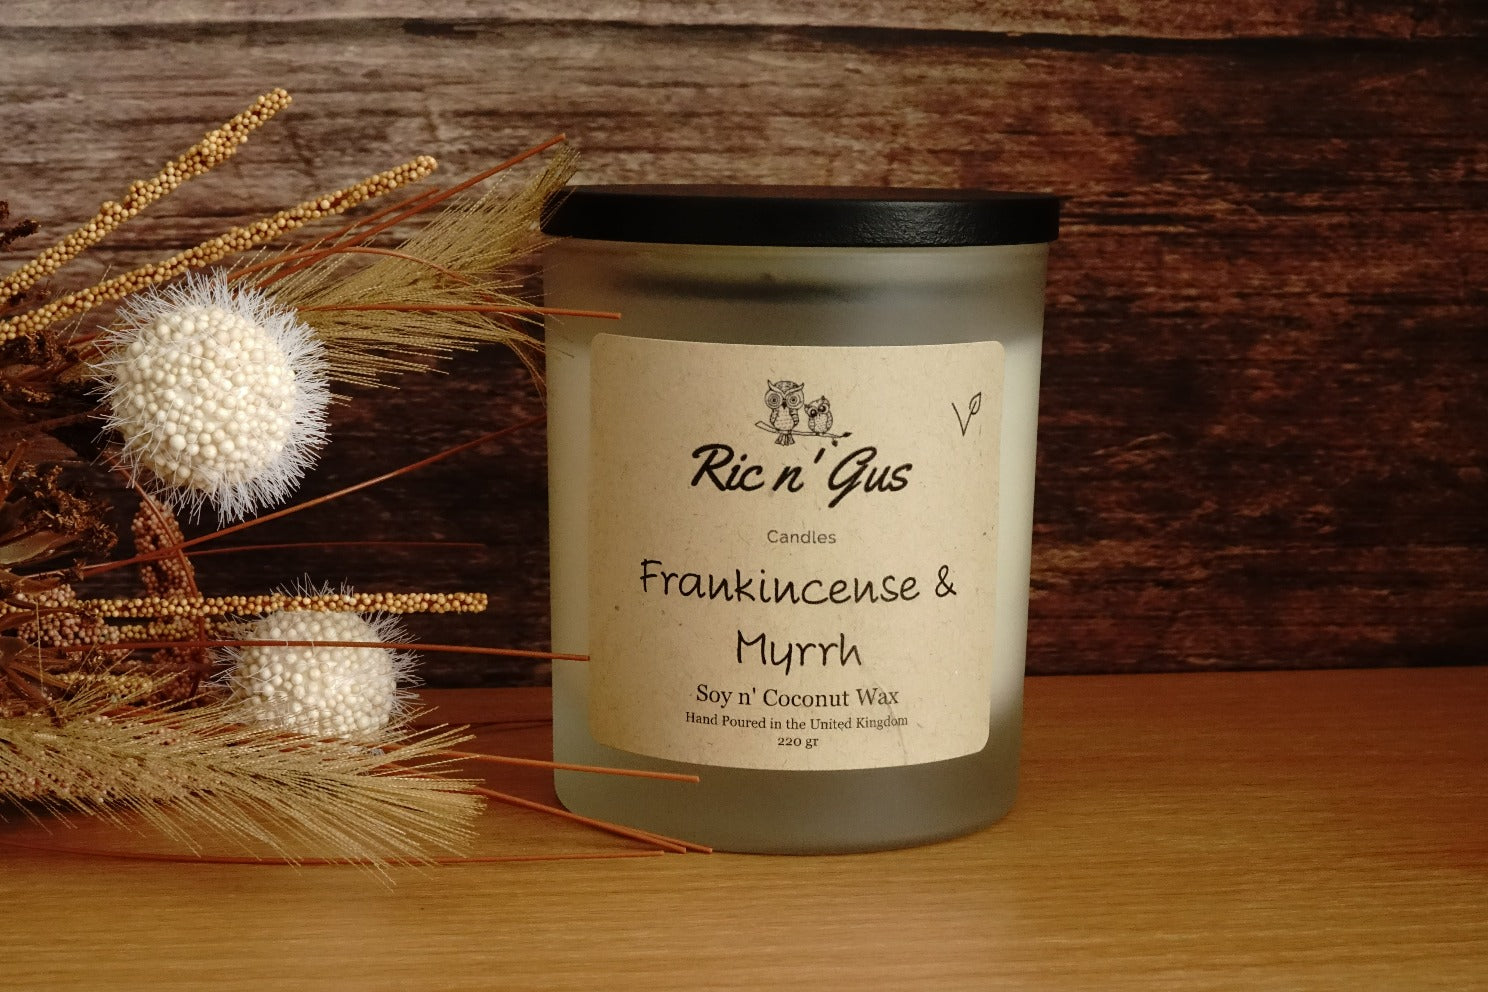 Frankincense & Myrrh Scented Candle - Soy & Coconut Wax Ric n'Gus Candles